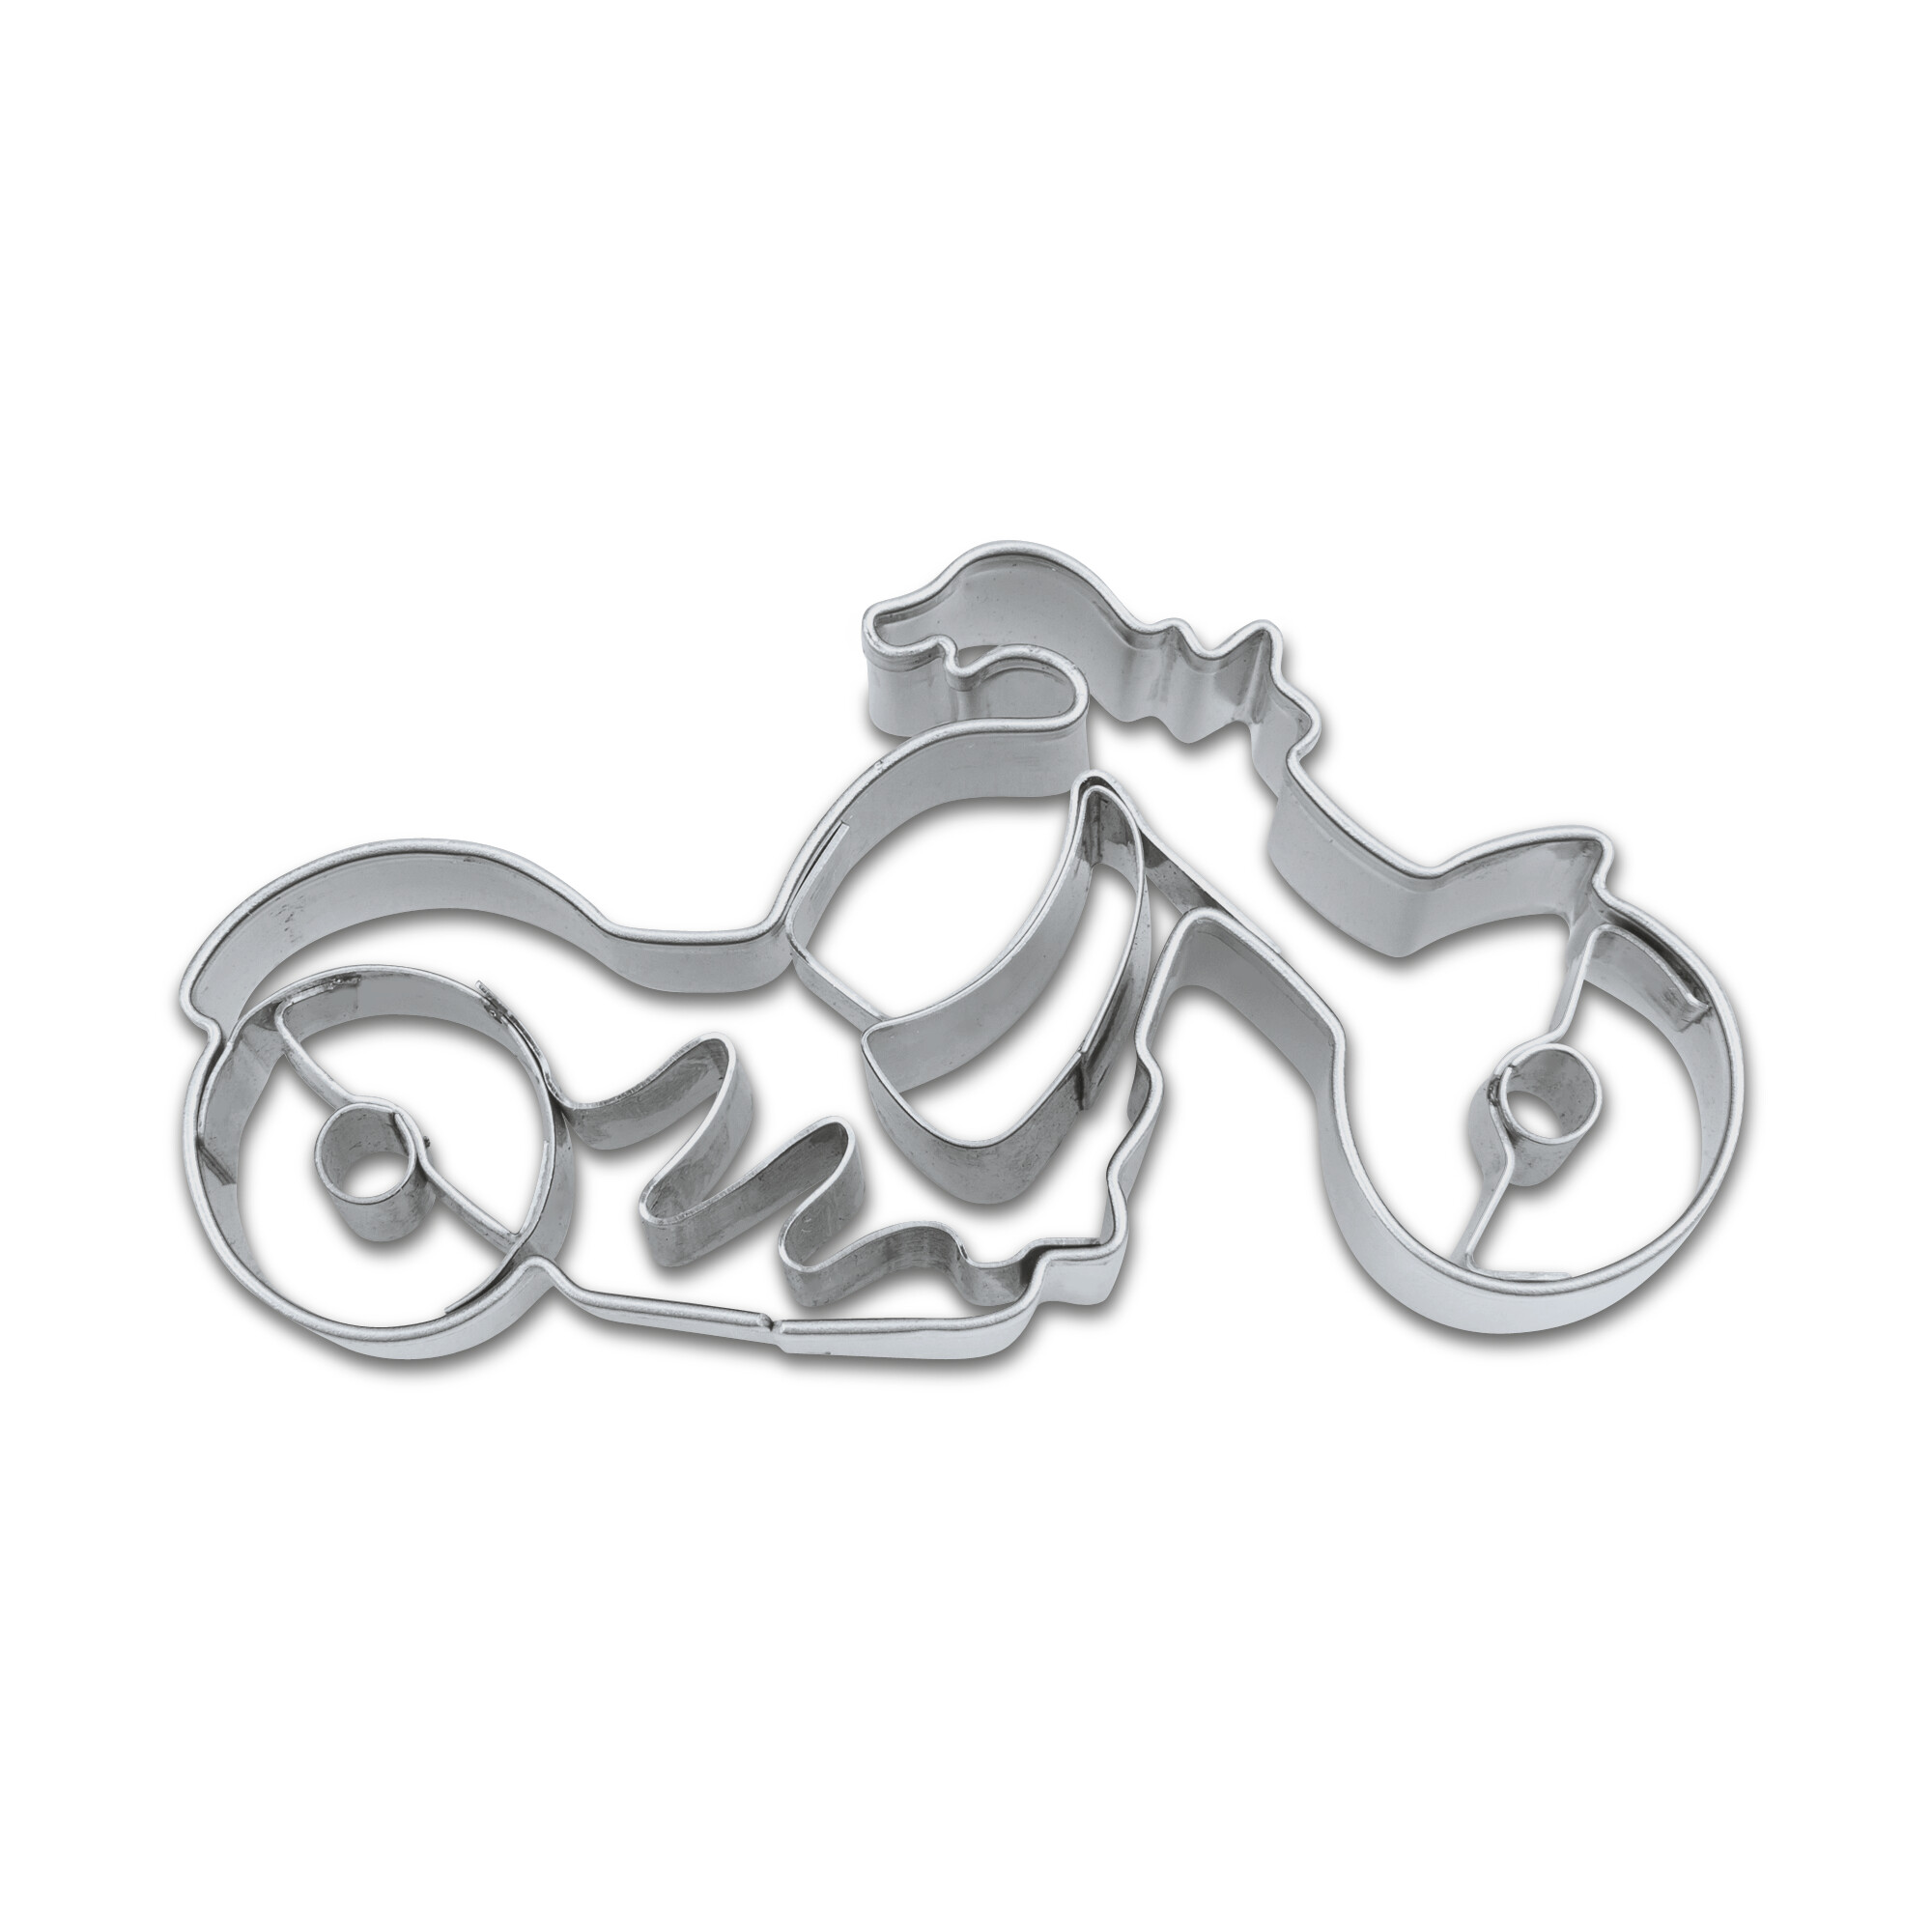 Cookie cutter with stamp – Motorcycle